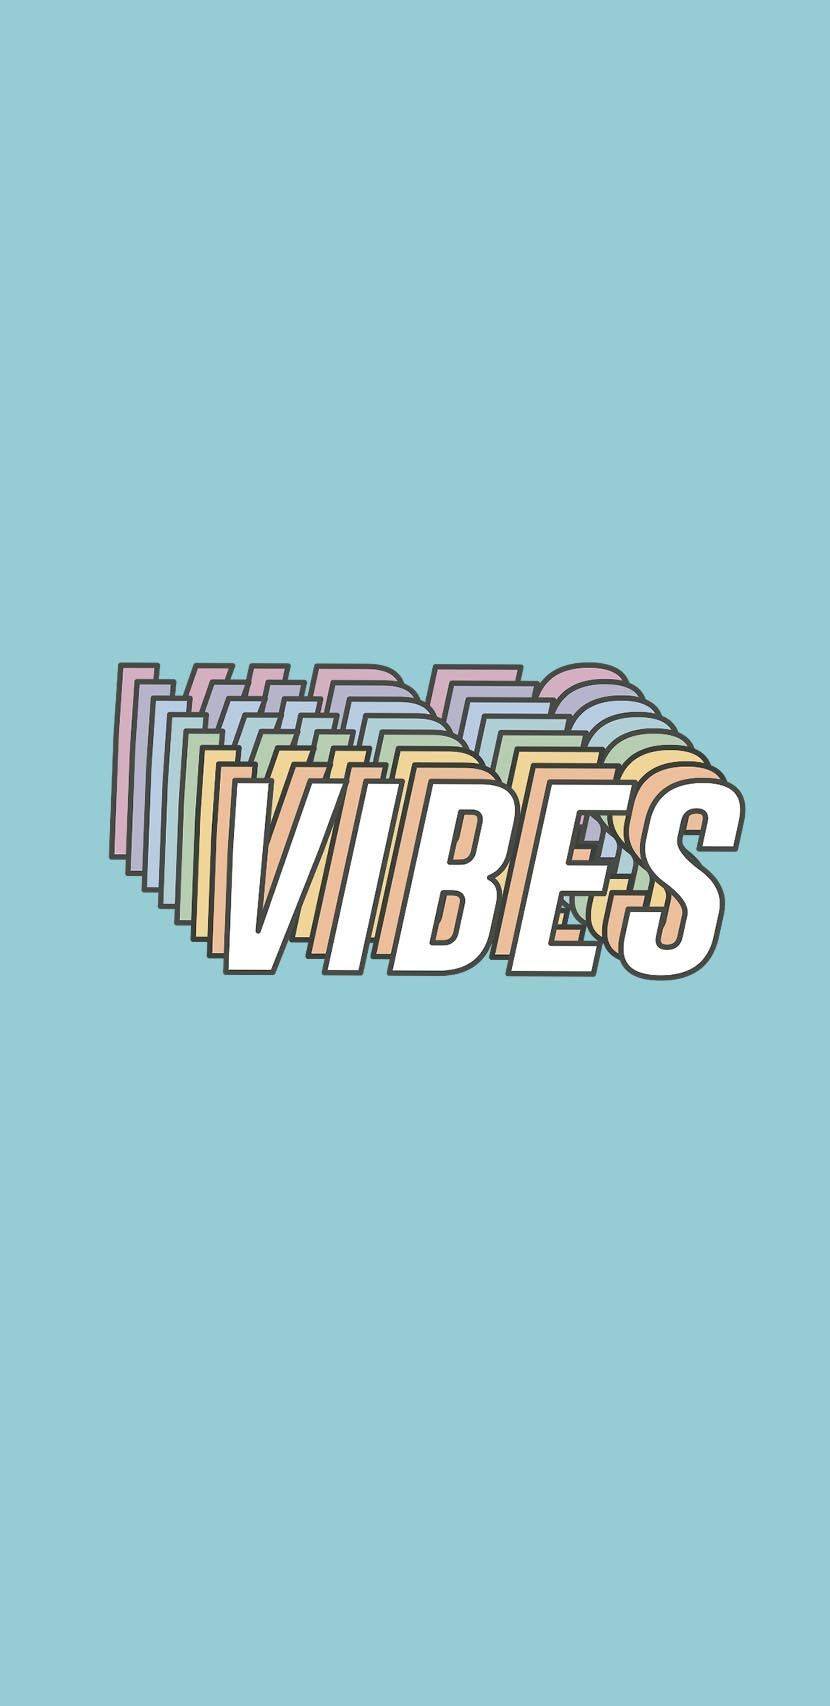 Only Good Vibes On A Lazy Day Wallpaper In